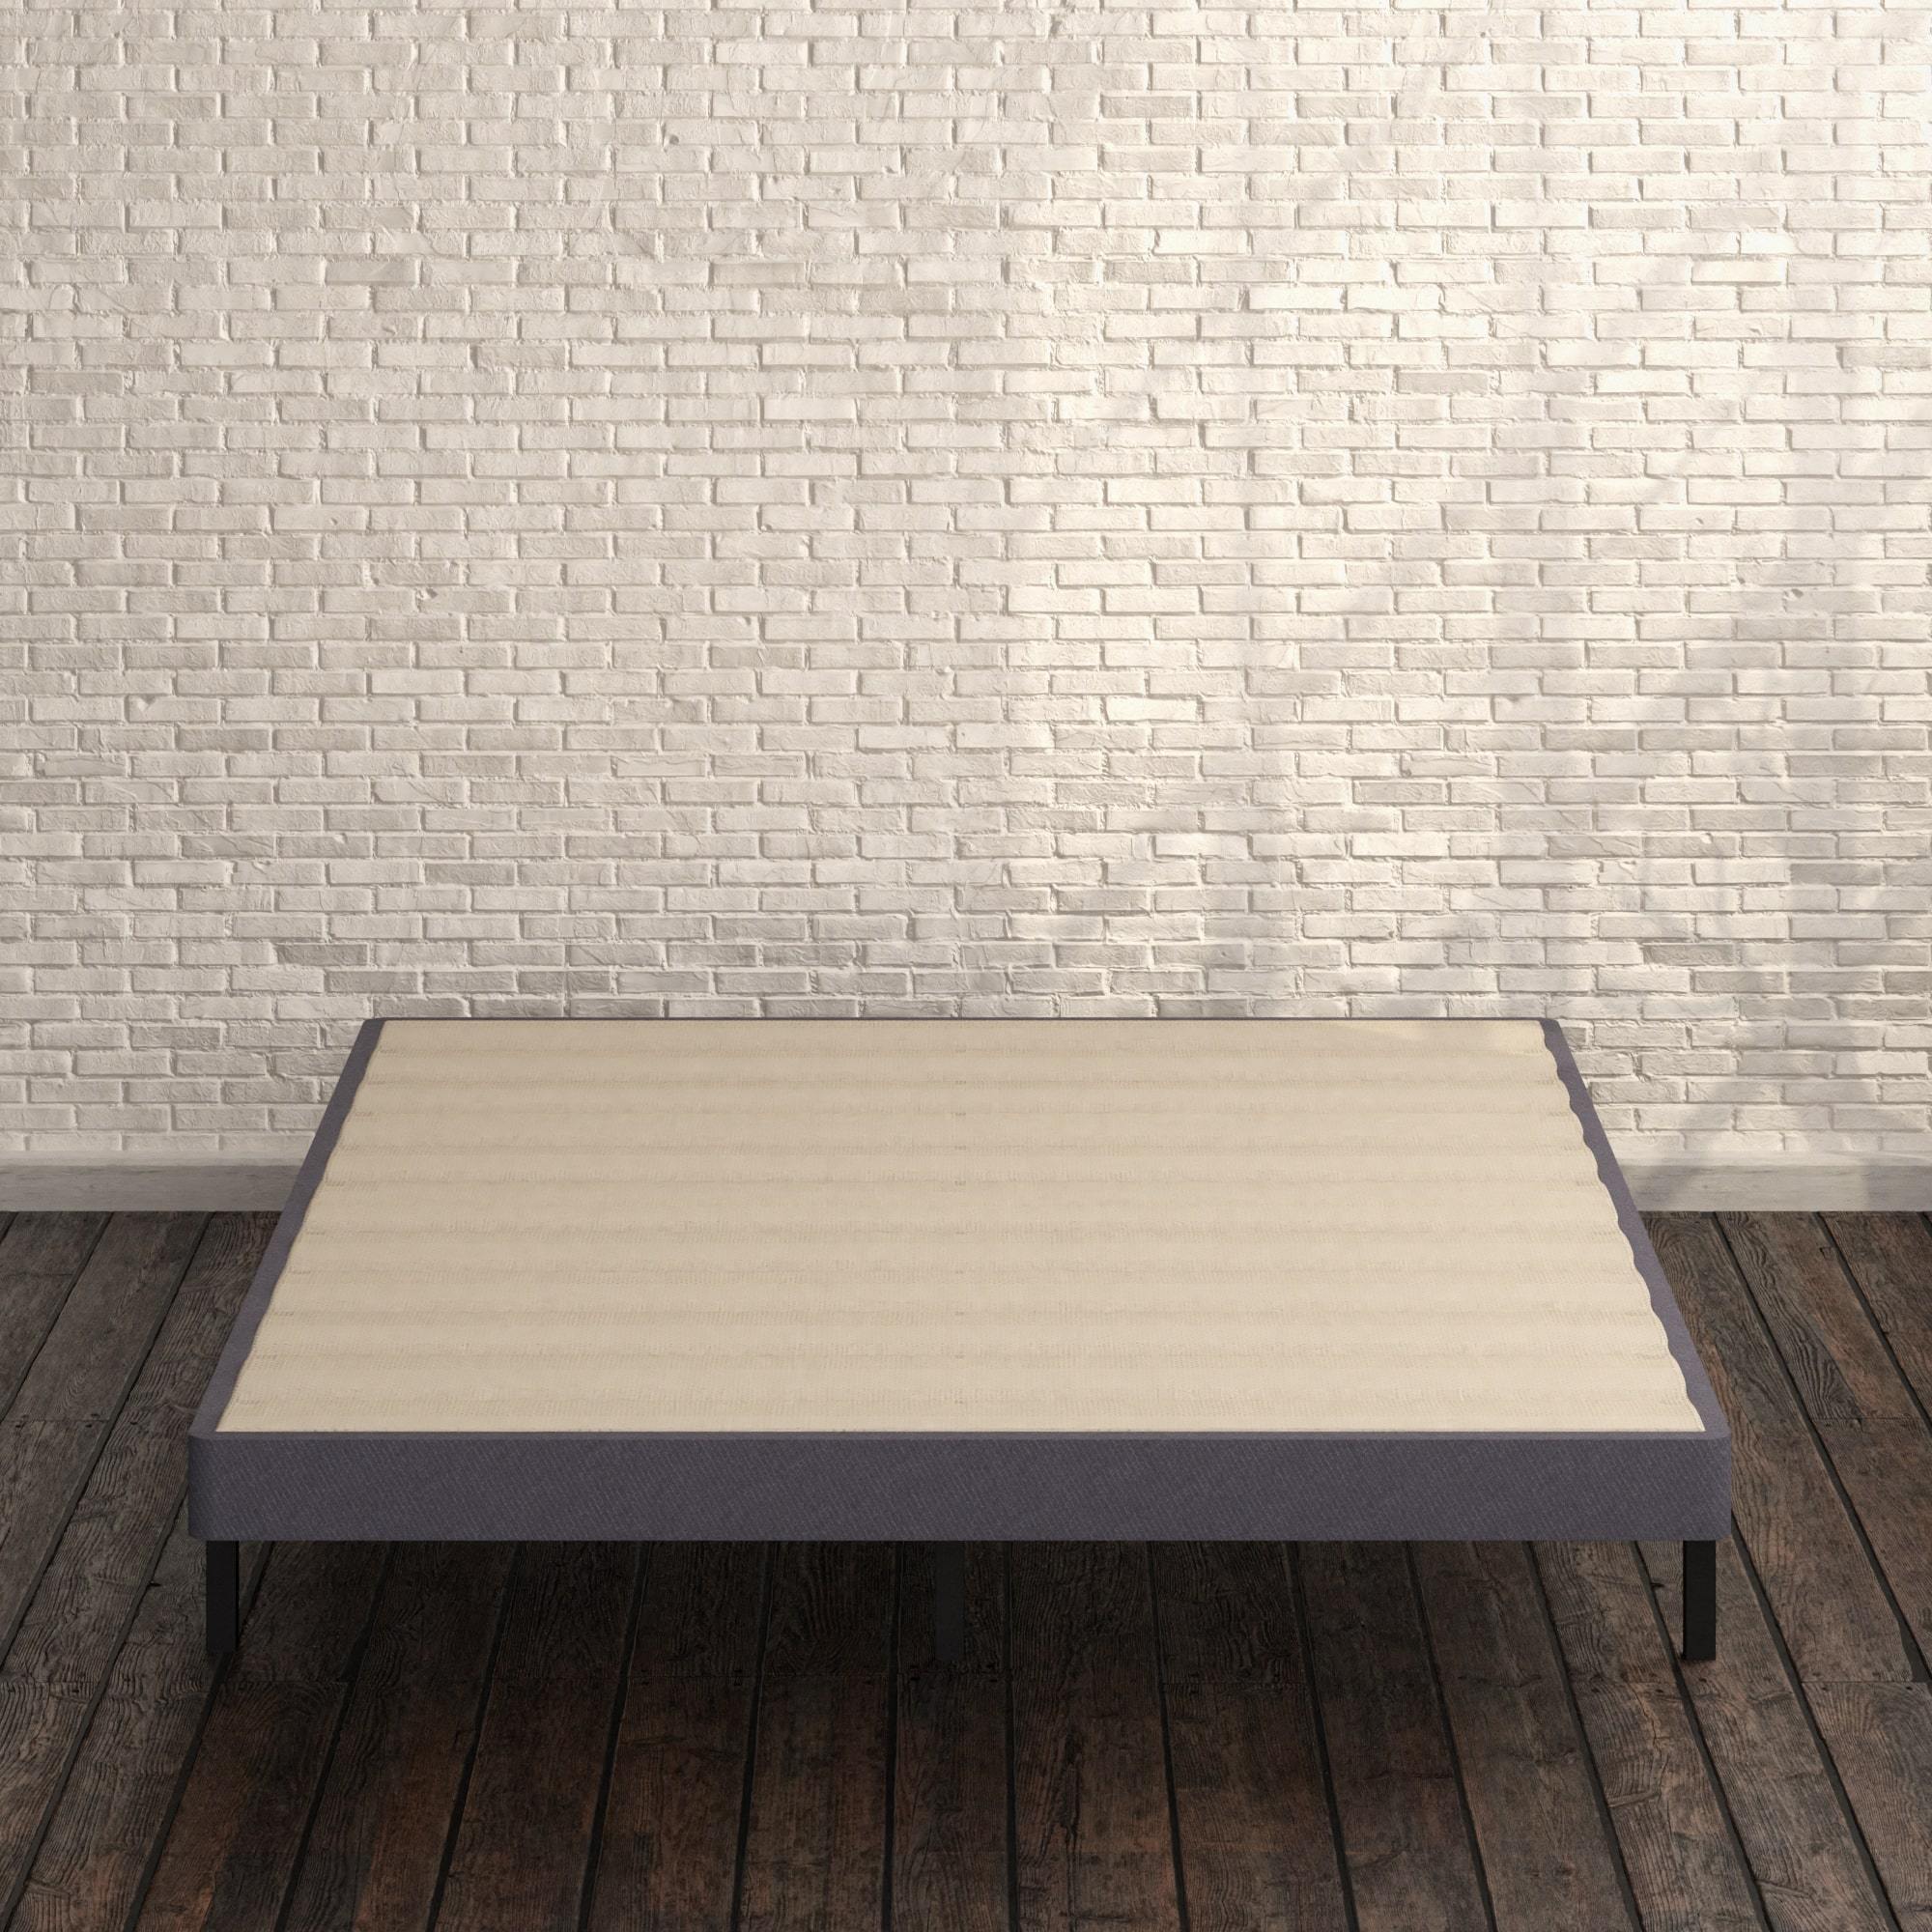 Upholstered Metal Box Spring with Wood Slats 4 inch